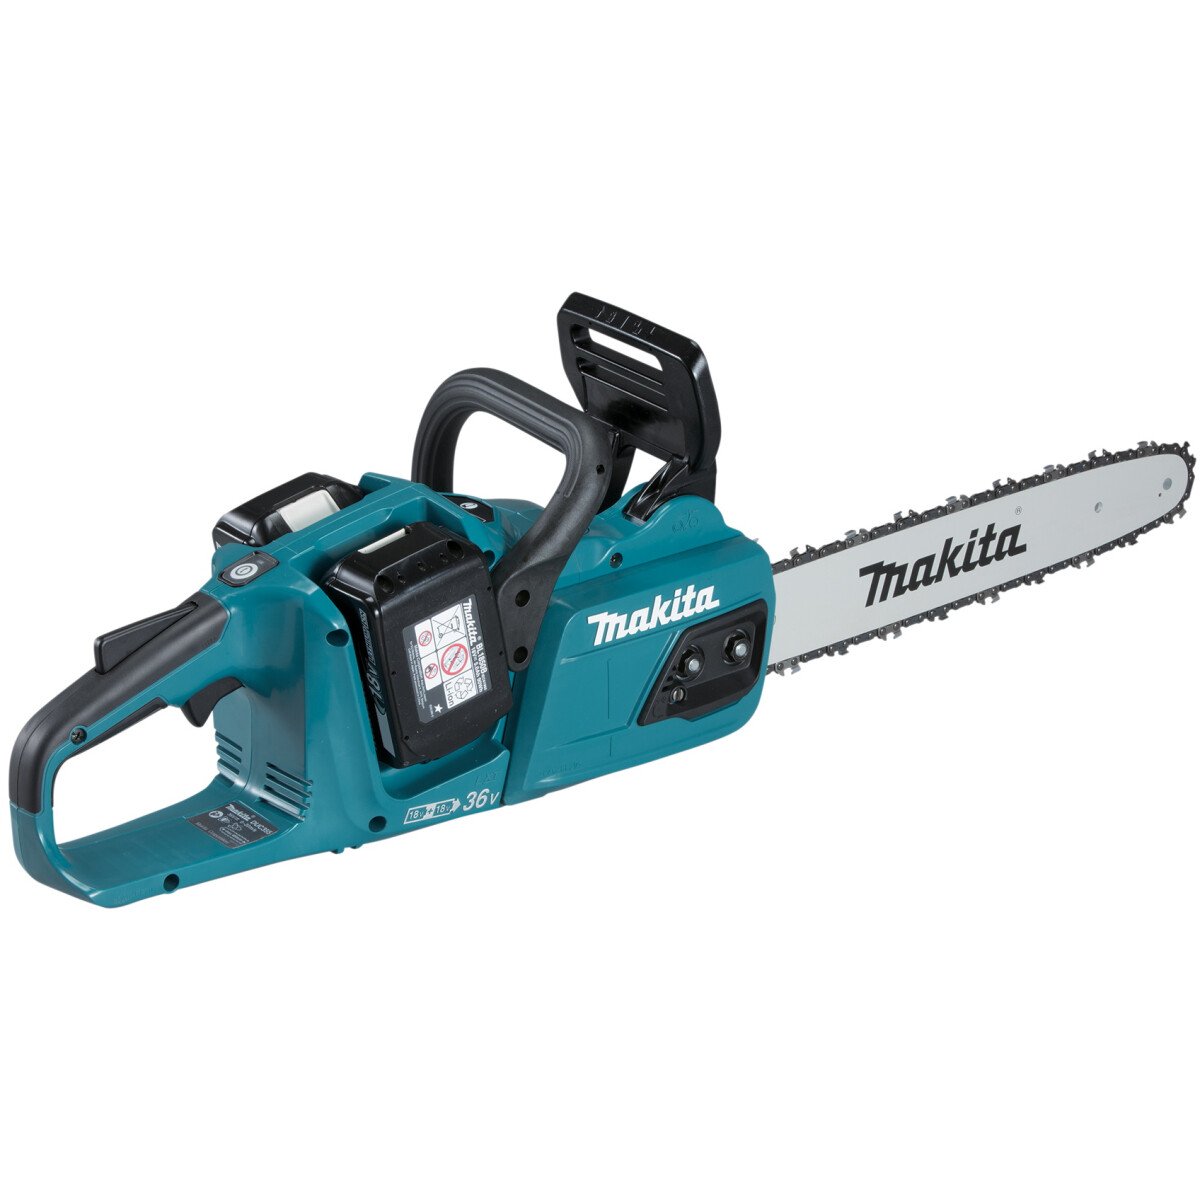 Makita DUC355PG2 Twin 18V Chainsaw 35cm with 2 x 6.0Ah Batteries 